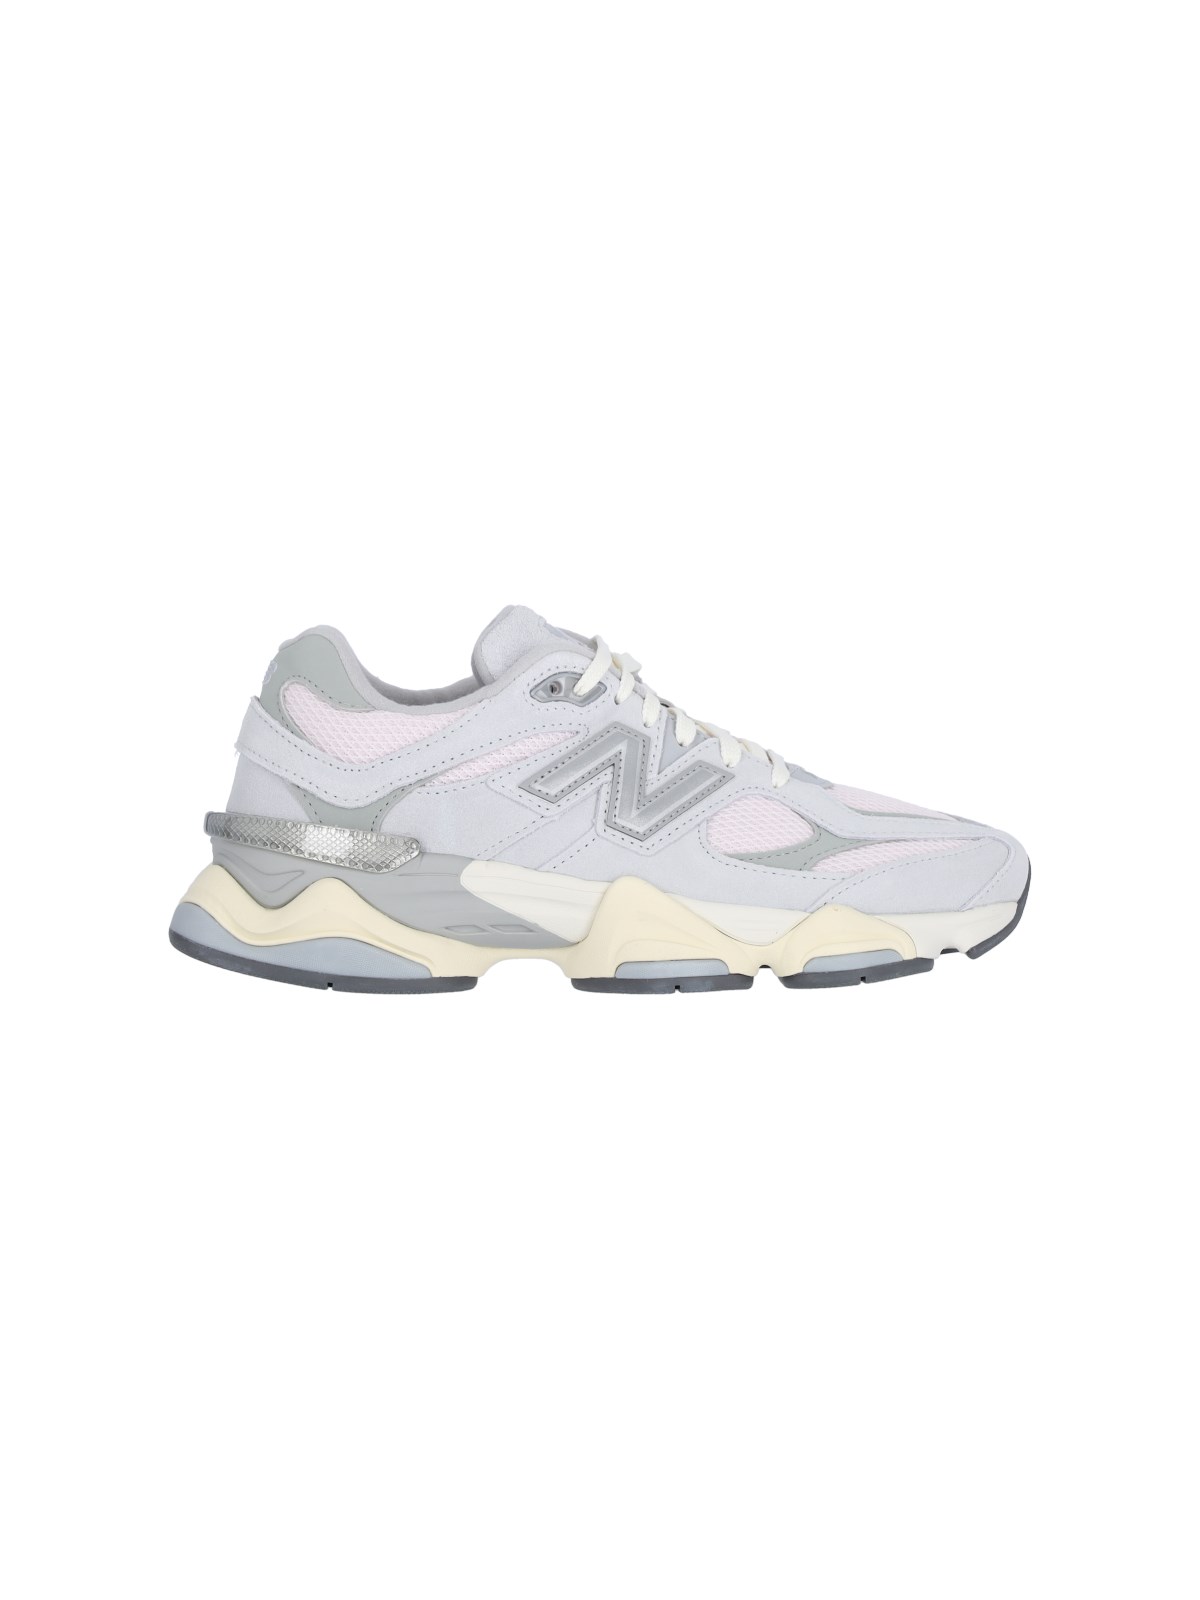 NEW BALANCE "9060" SNEAKERS